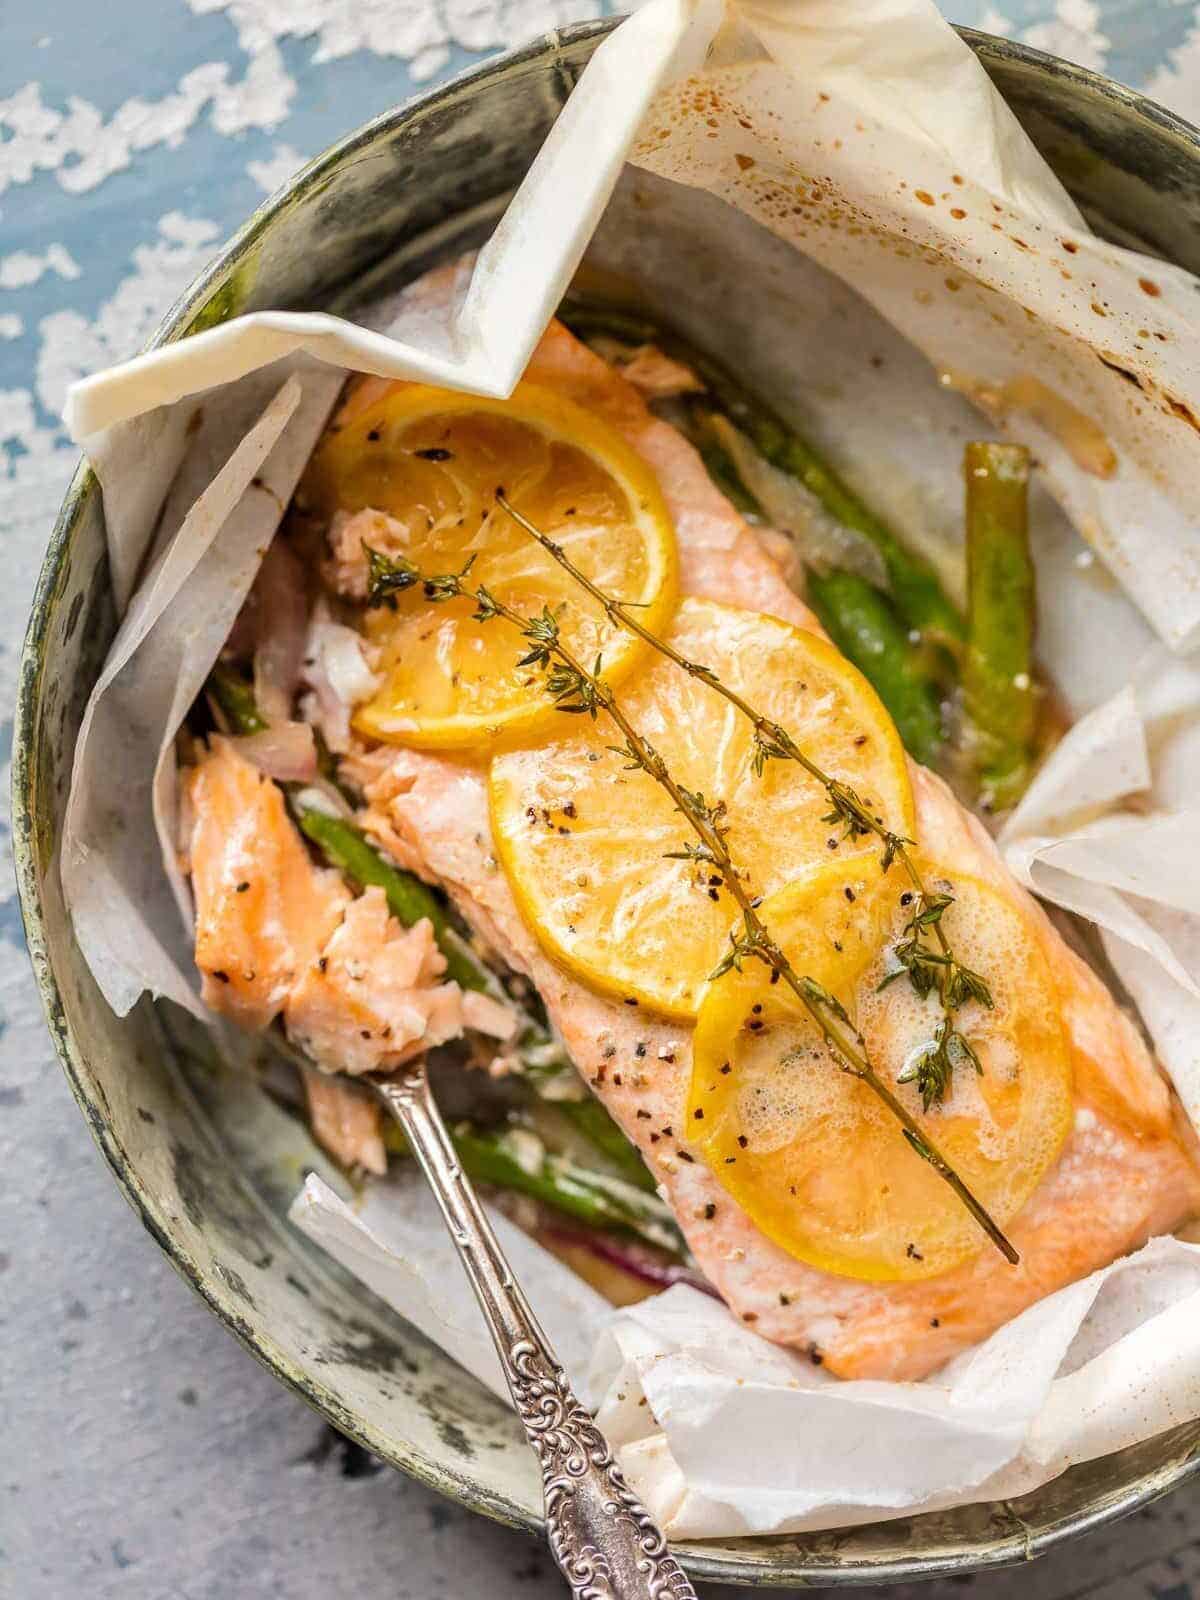 Lemon butter salmon cooked in parchment paper with asparagus.